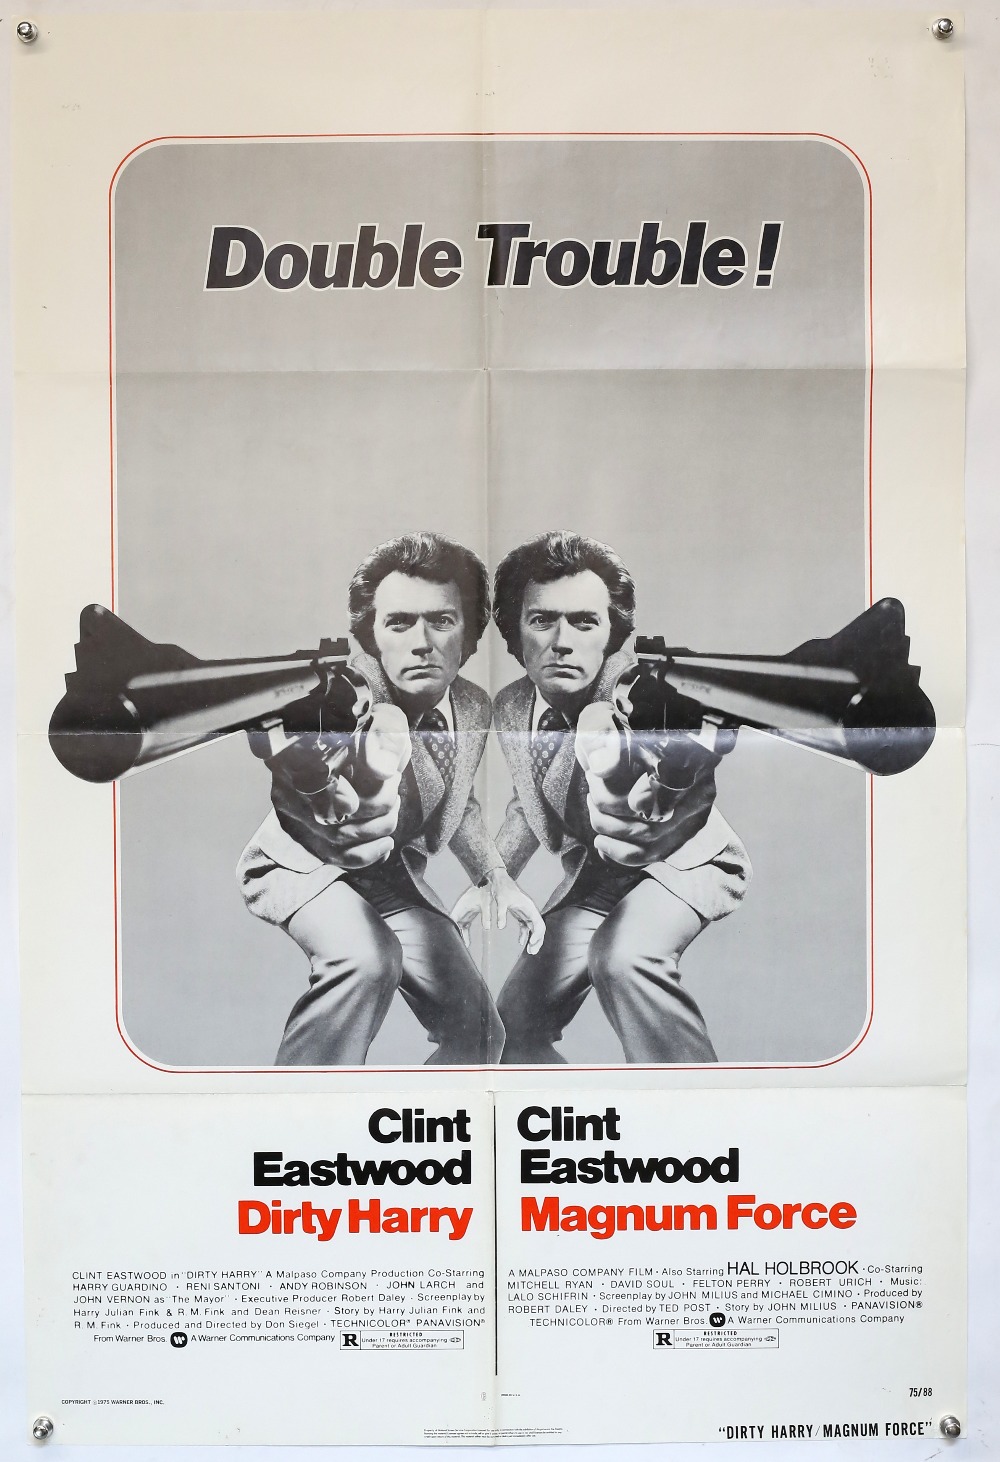 Dirty Harry / Magnum Force (1975) US One sheet film poster, starring Clint Eastwood, folded, 27 x 41